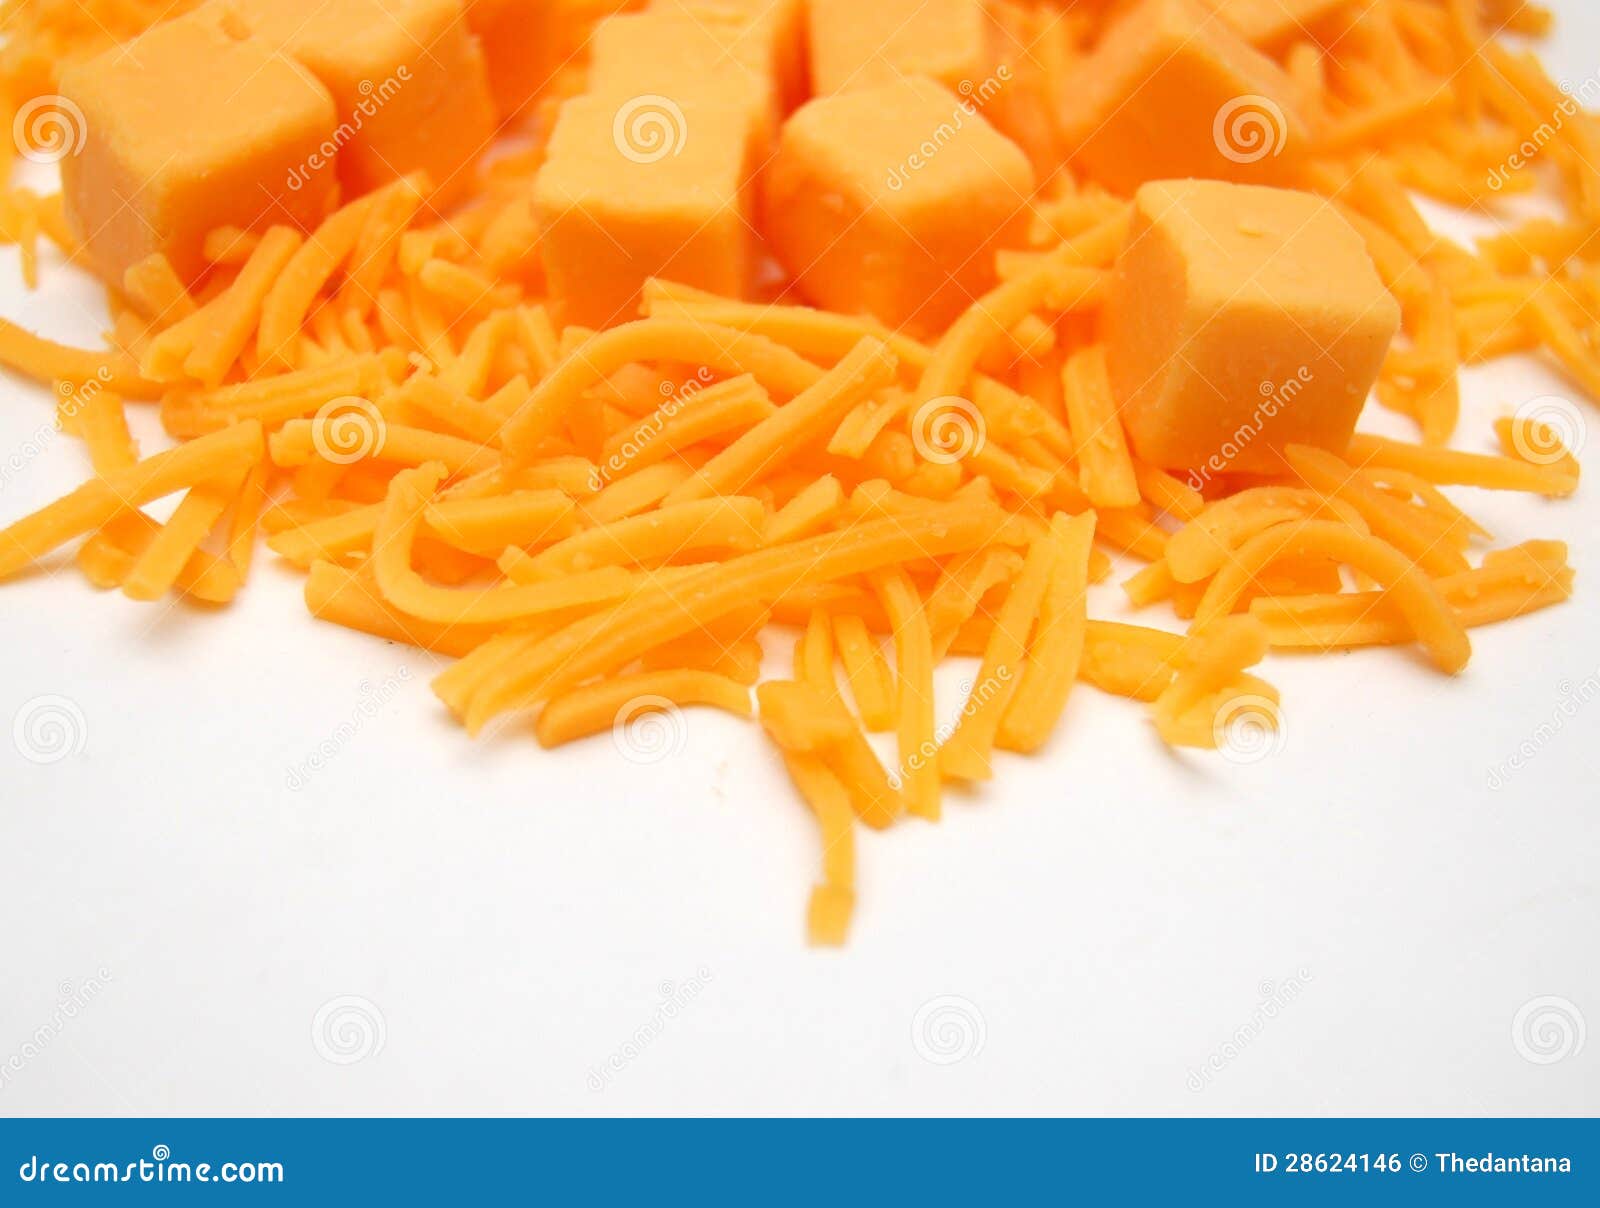 Shredded Cheese stock photo. Image of ingredients, home - 28624146